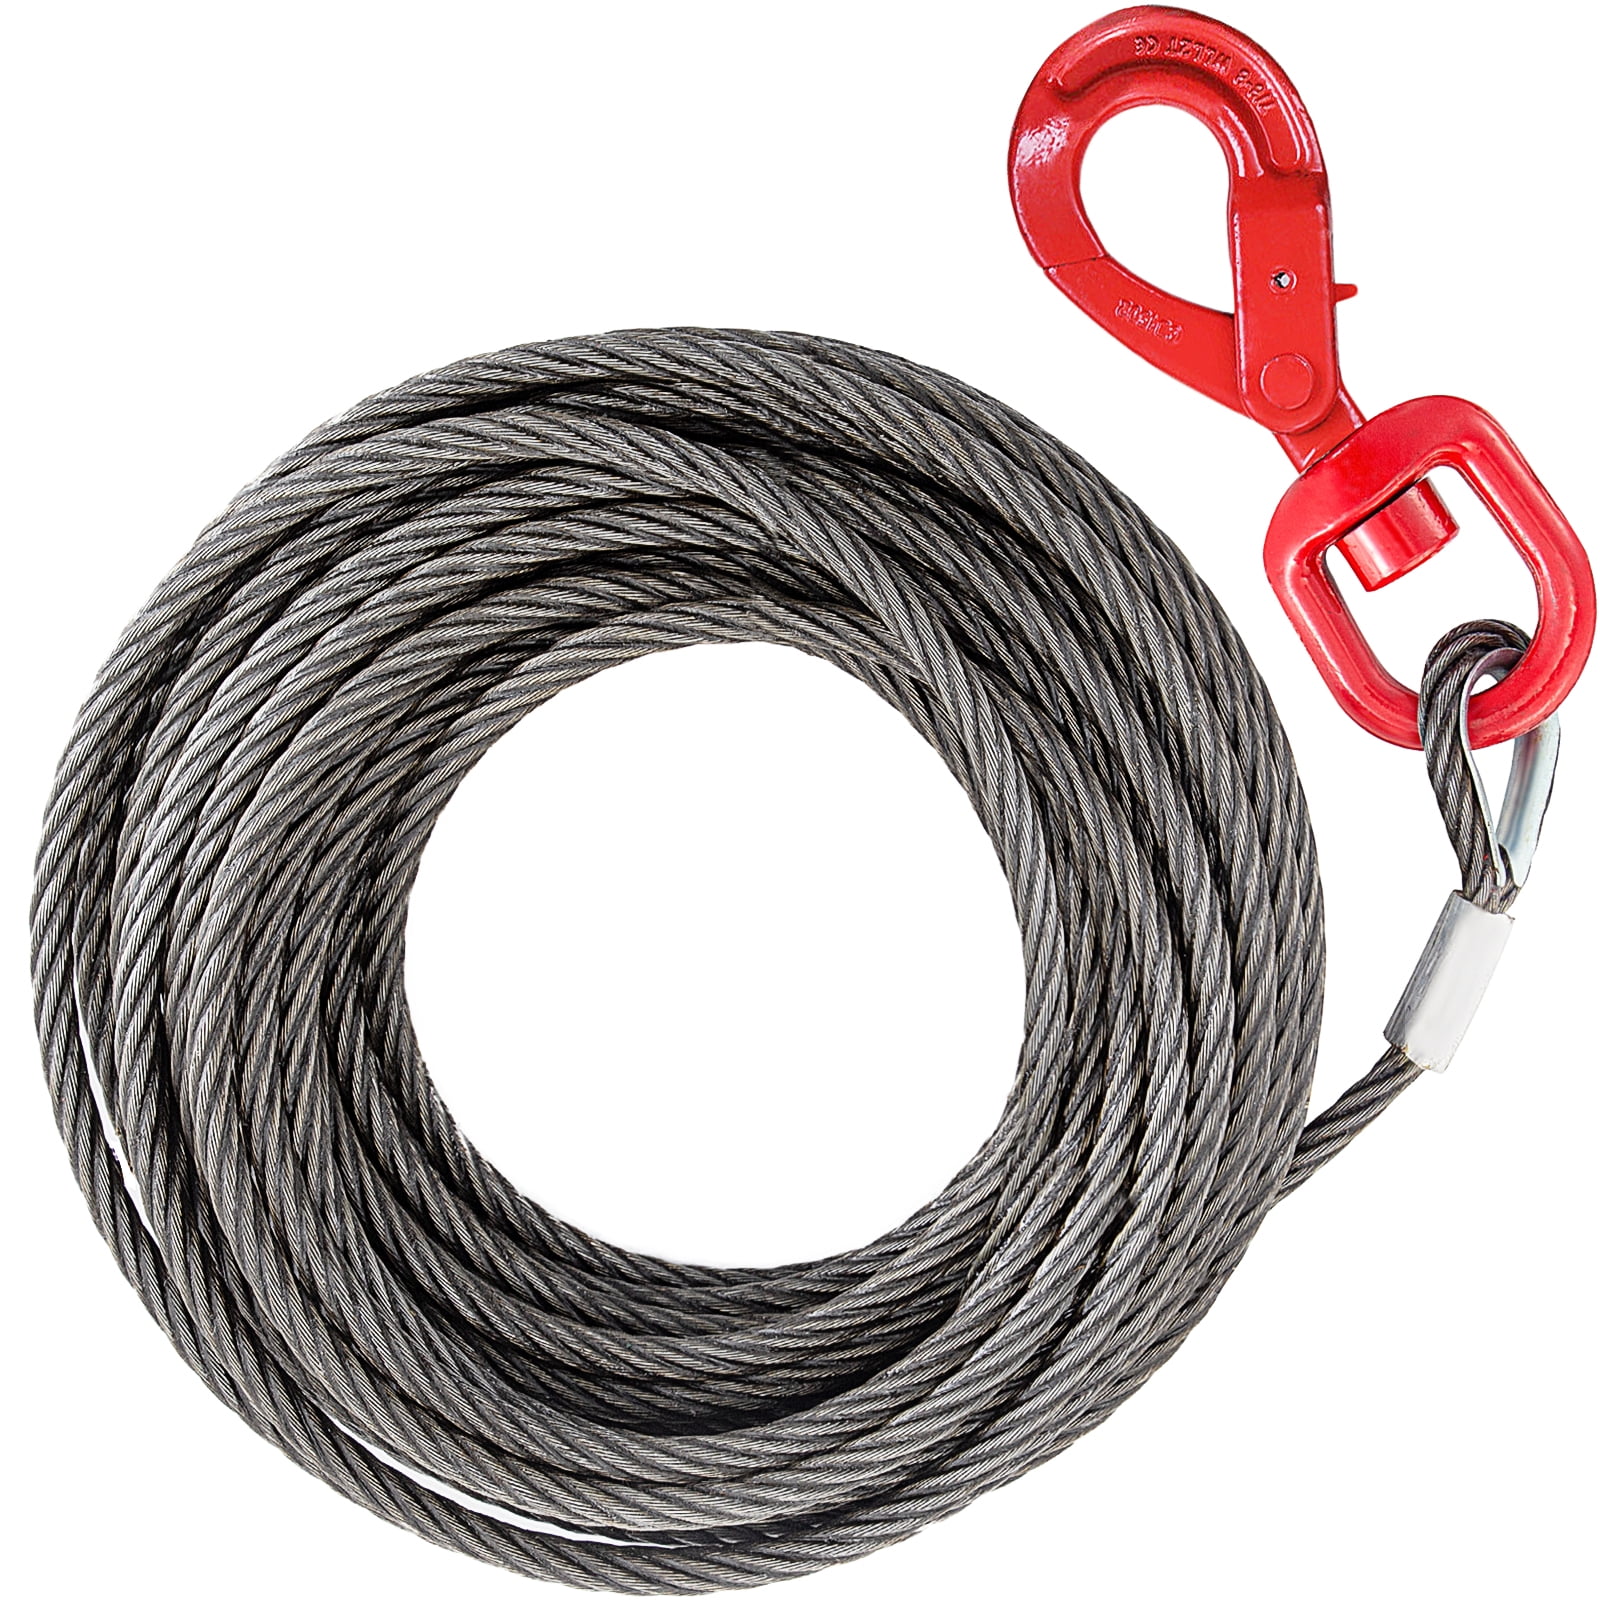 Steel Winch Cable, 3/8 x 13ft, Wire Rope with Hook, 11023lb Breaking  Strength, Towing Cable Heavy Duty, for Tow Truck, Rollback, Crane, Wrecker